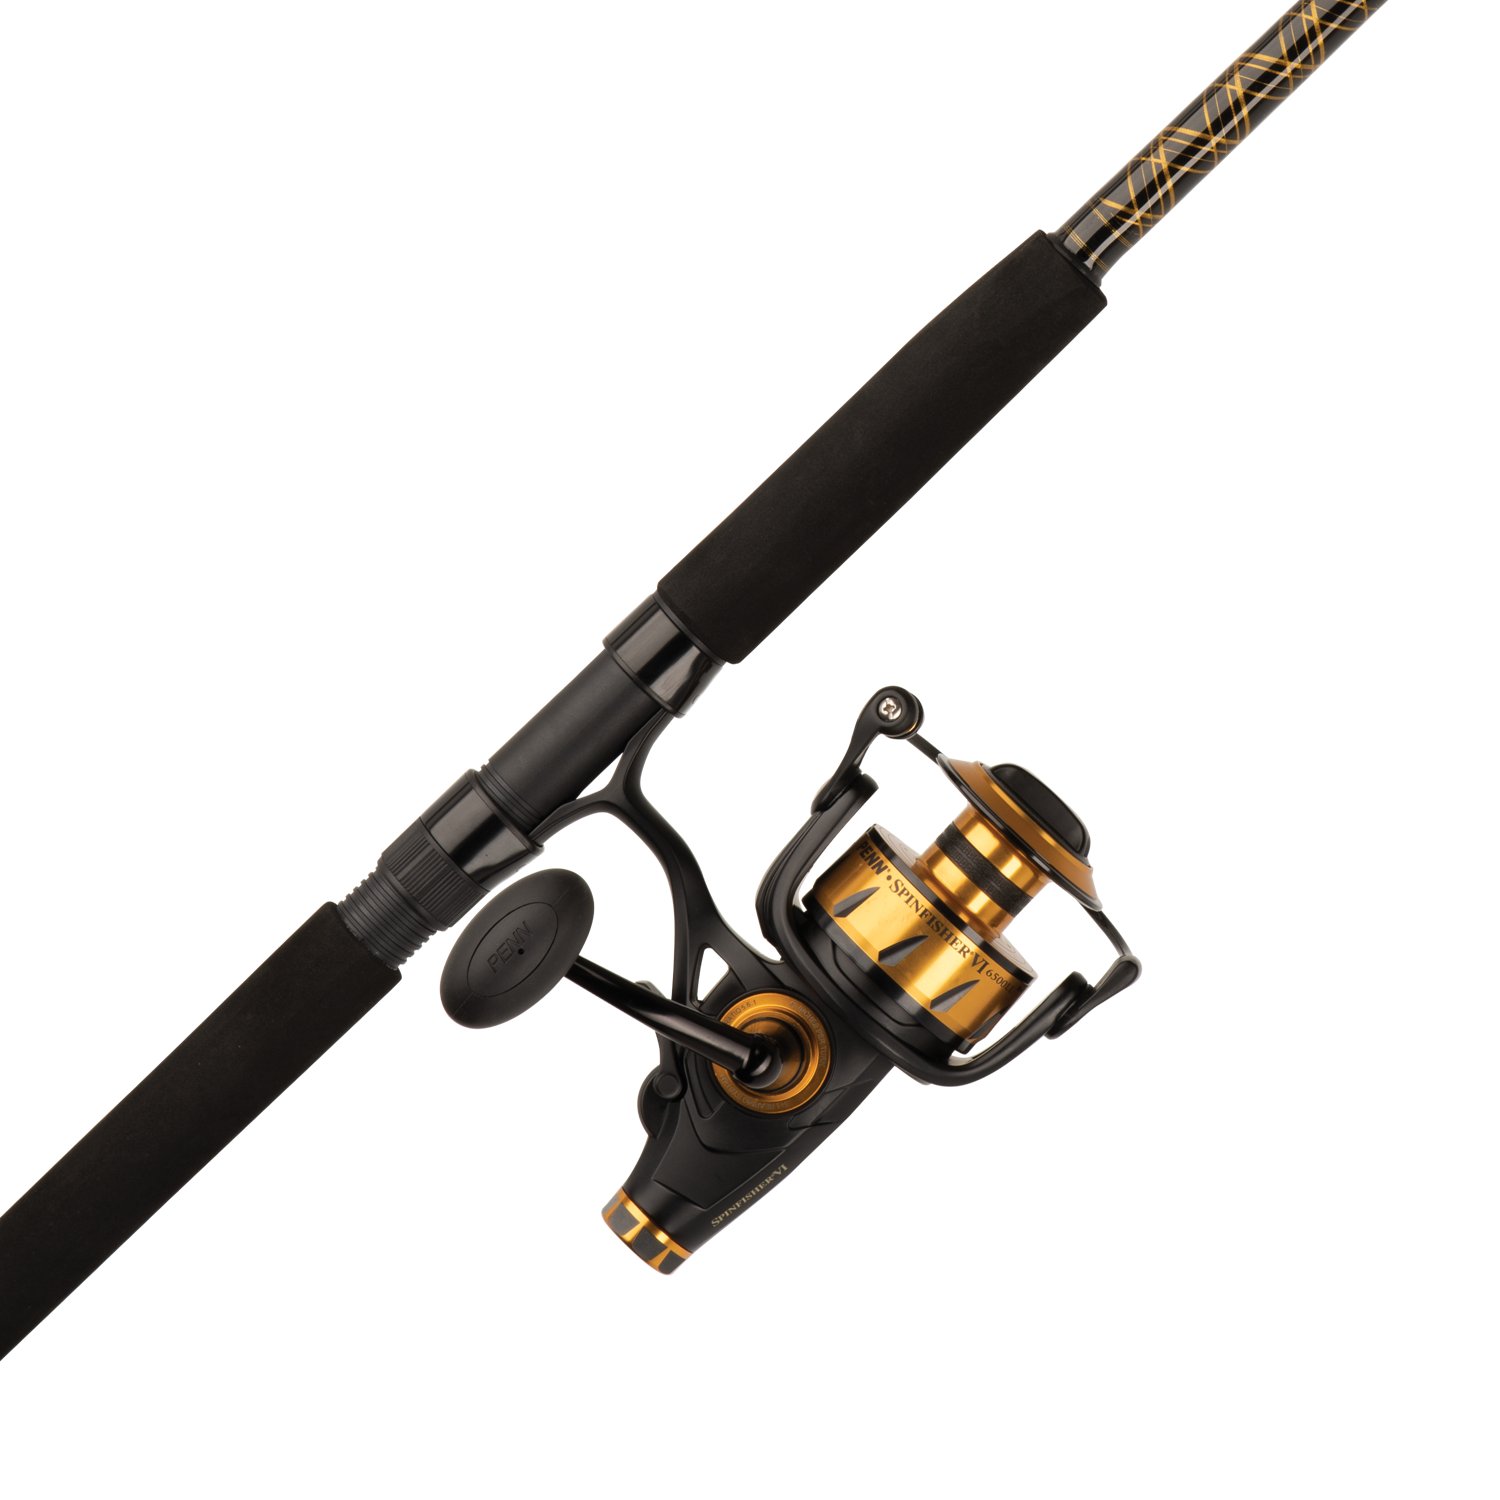 https://academy.scene7.com/is/image/academy//fishing-rod---reel-combos/penn-spinfisher-vi-ll-7-ft-mh-saltwater-spinning-rod-and-reel-combo-ssvi4500ll701m-/cf8d59ff220a4d189261e4d20bd1cb41